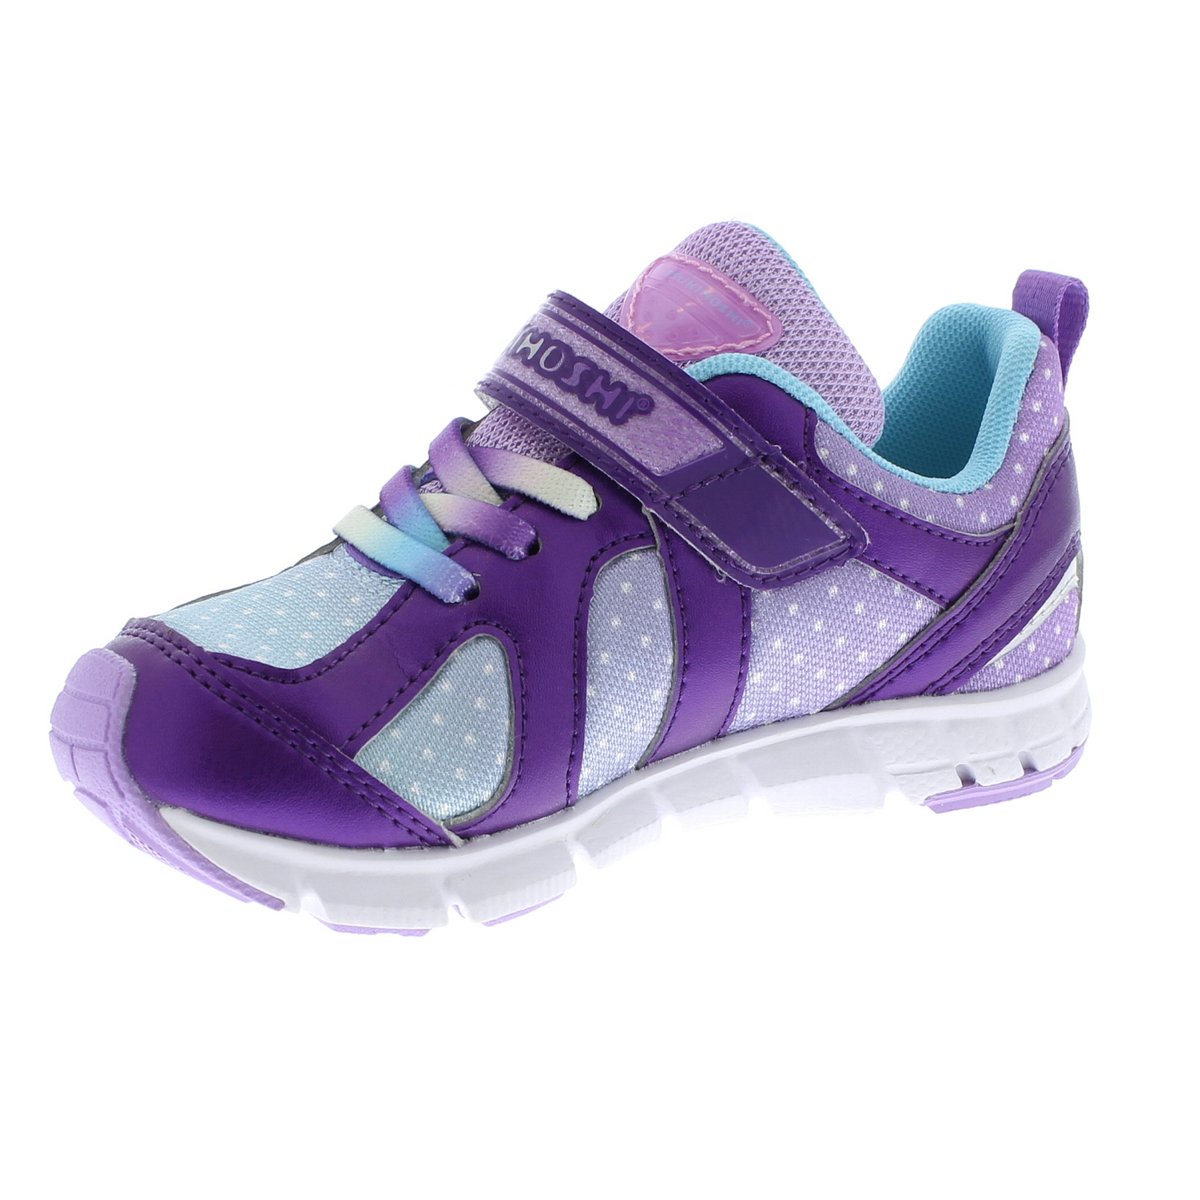 Child Tsukihoshi Rainbow Sneaker in Purple/Light Blue from the front view